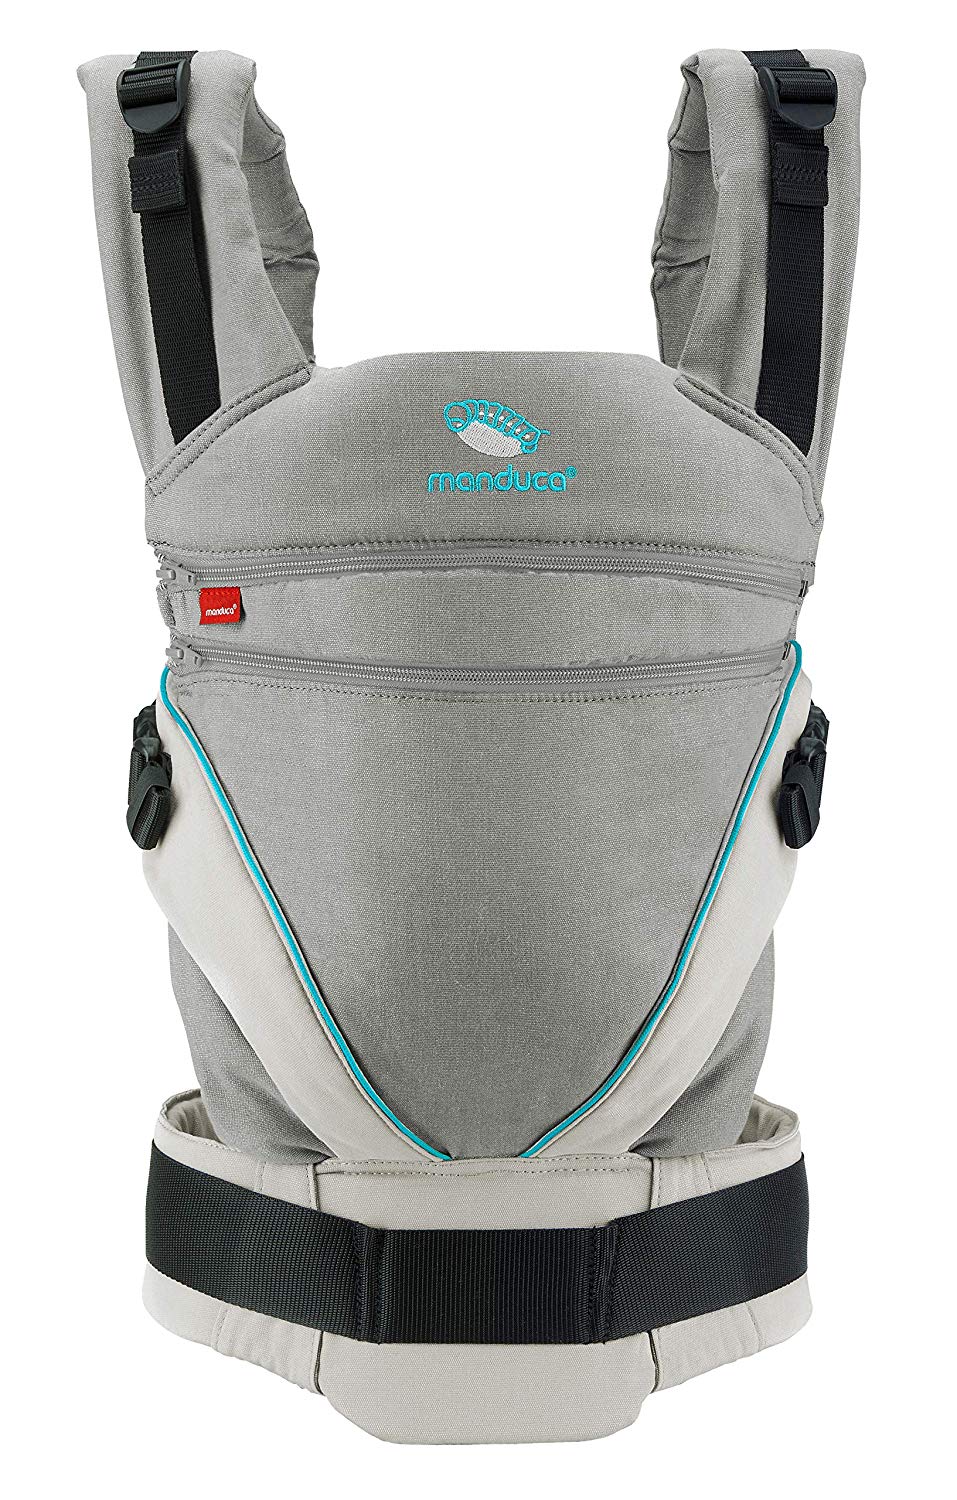 manduca XT/All-In-One Baby Carrier for Newborns - Organic Cotton, One Size, Grows with Your Child - Flexible Carrying System for Babies and Children from 3.5 to 20 kg